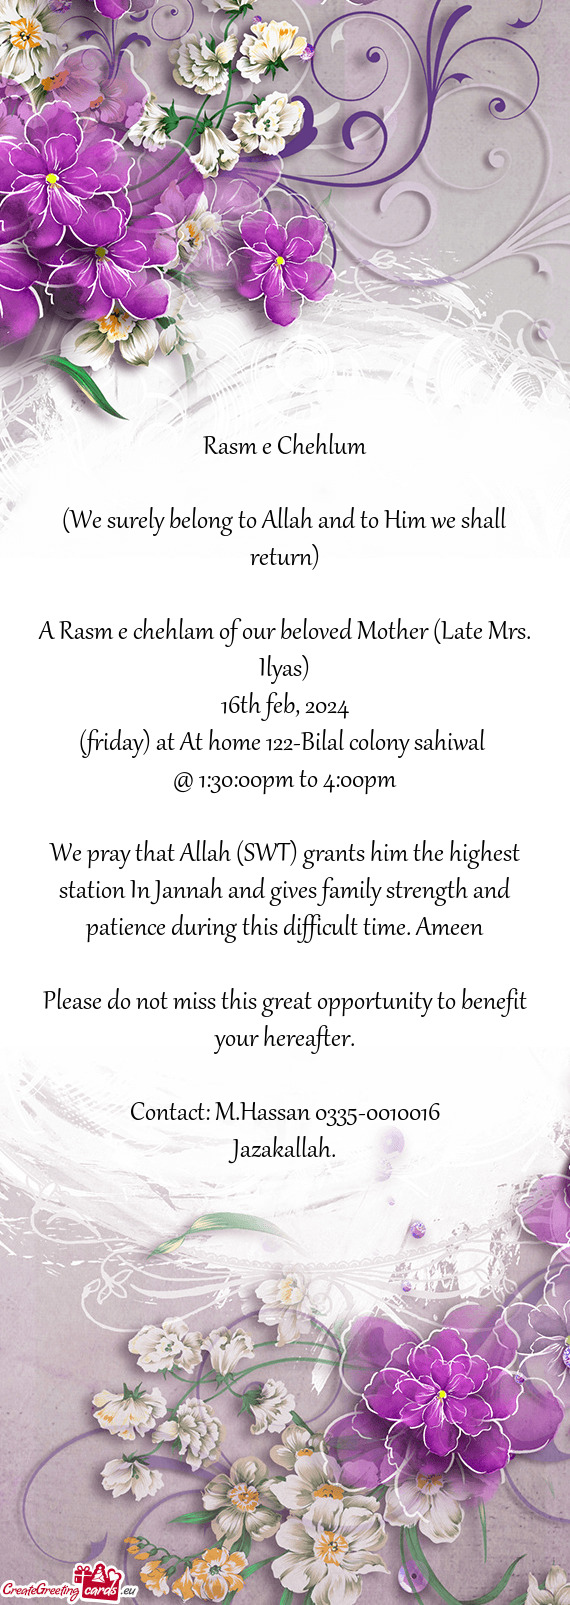 A Rasm e chehlam of our beloved Mother (Late Mrs. Ilyas)